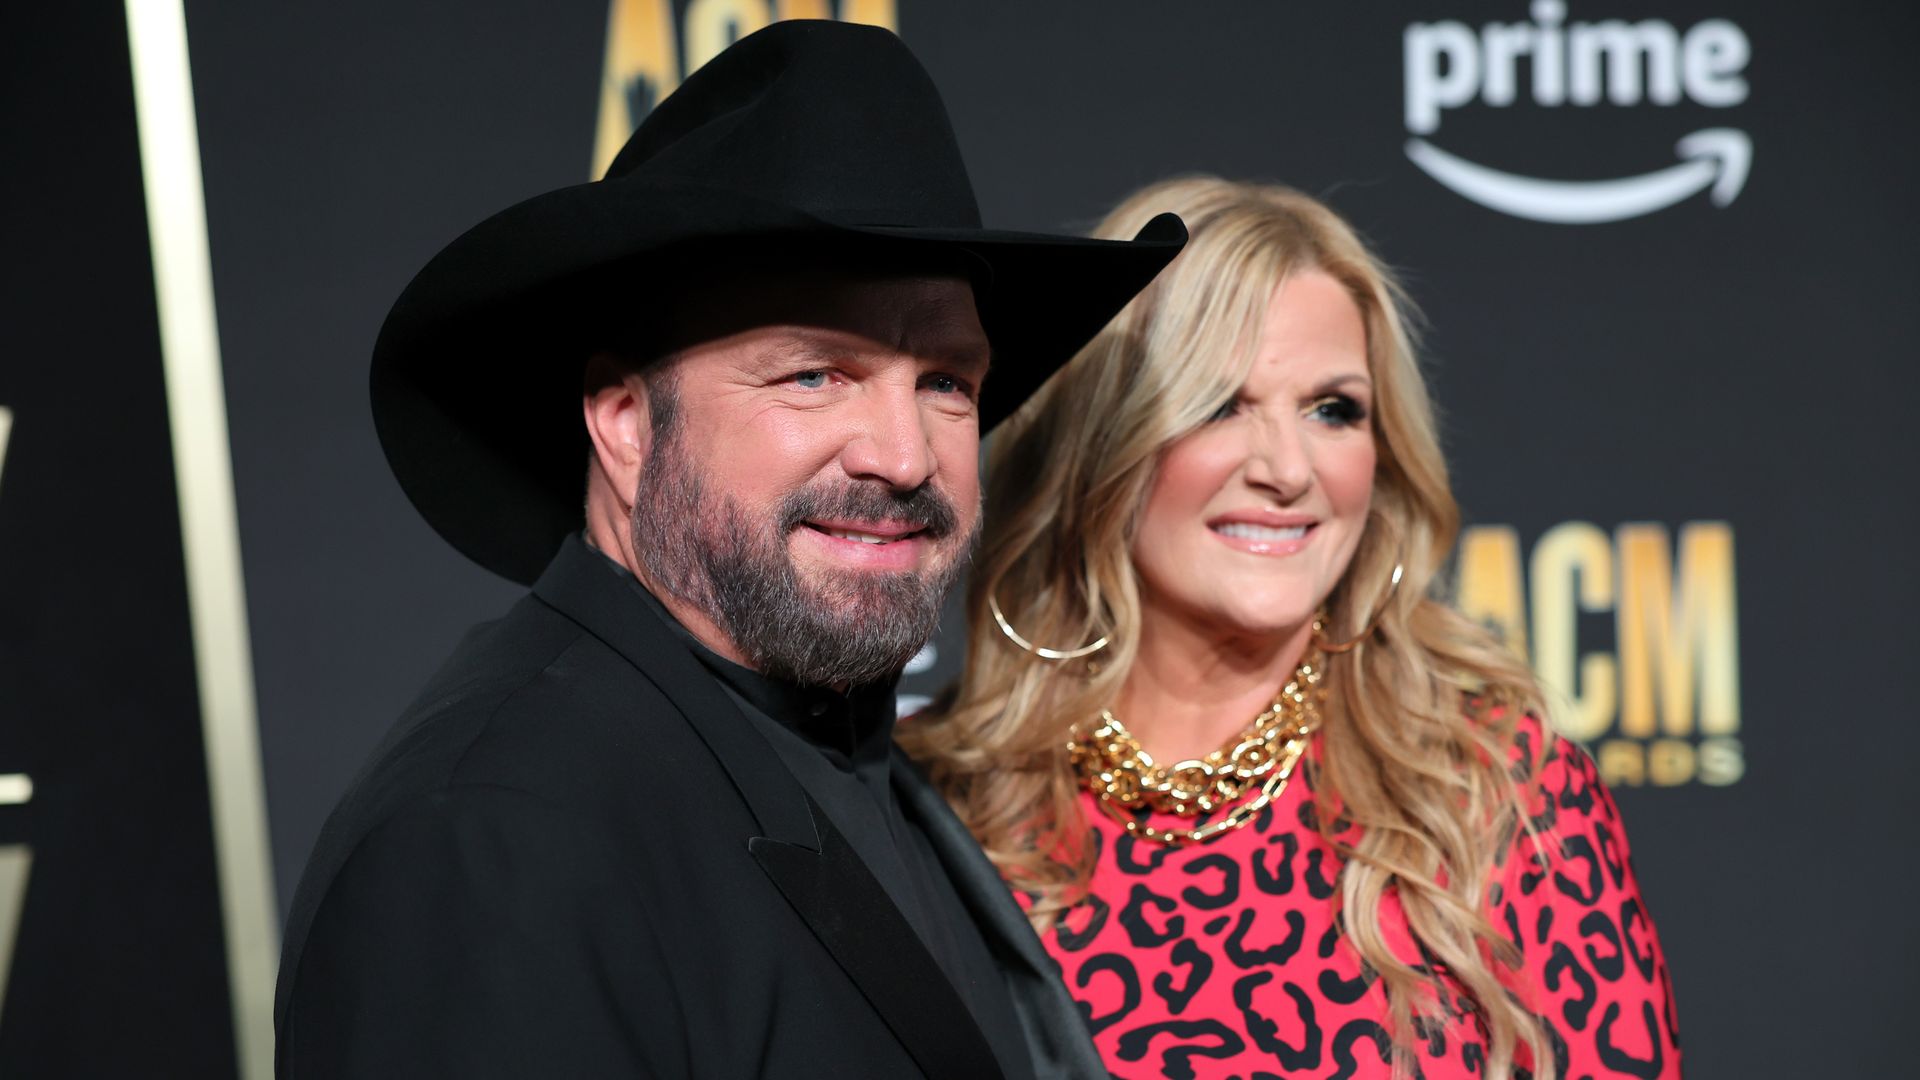 Garth Brooks confesses to messy wedding mishap with late mother-in-law right before marrying Trisha Yearwood